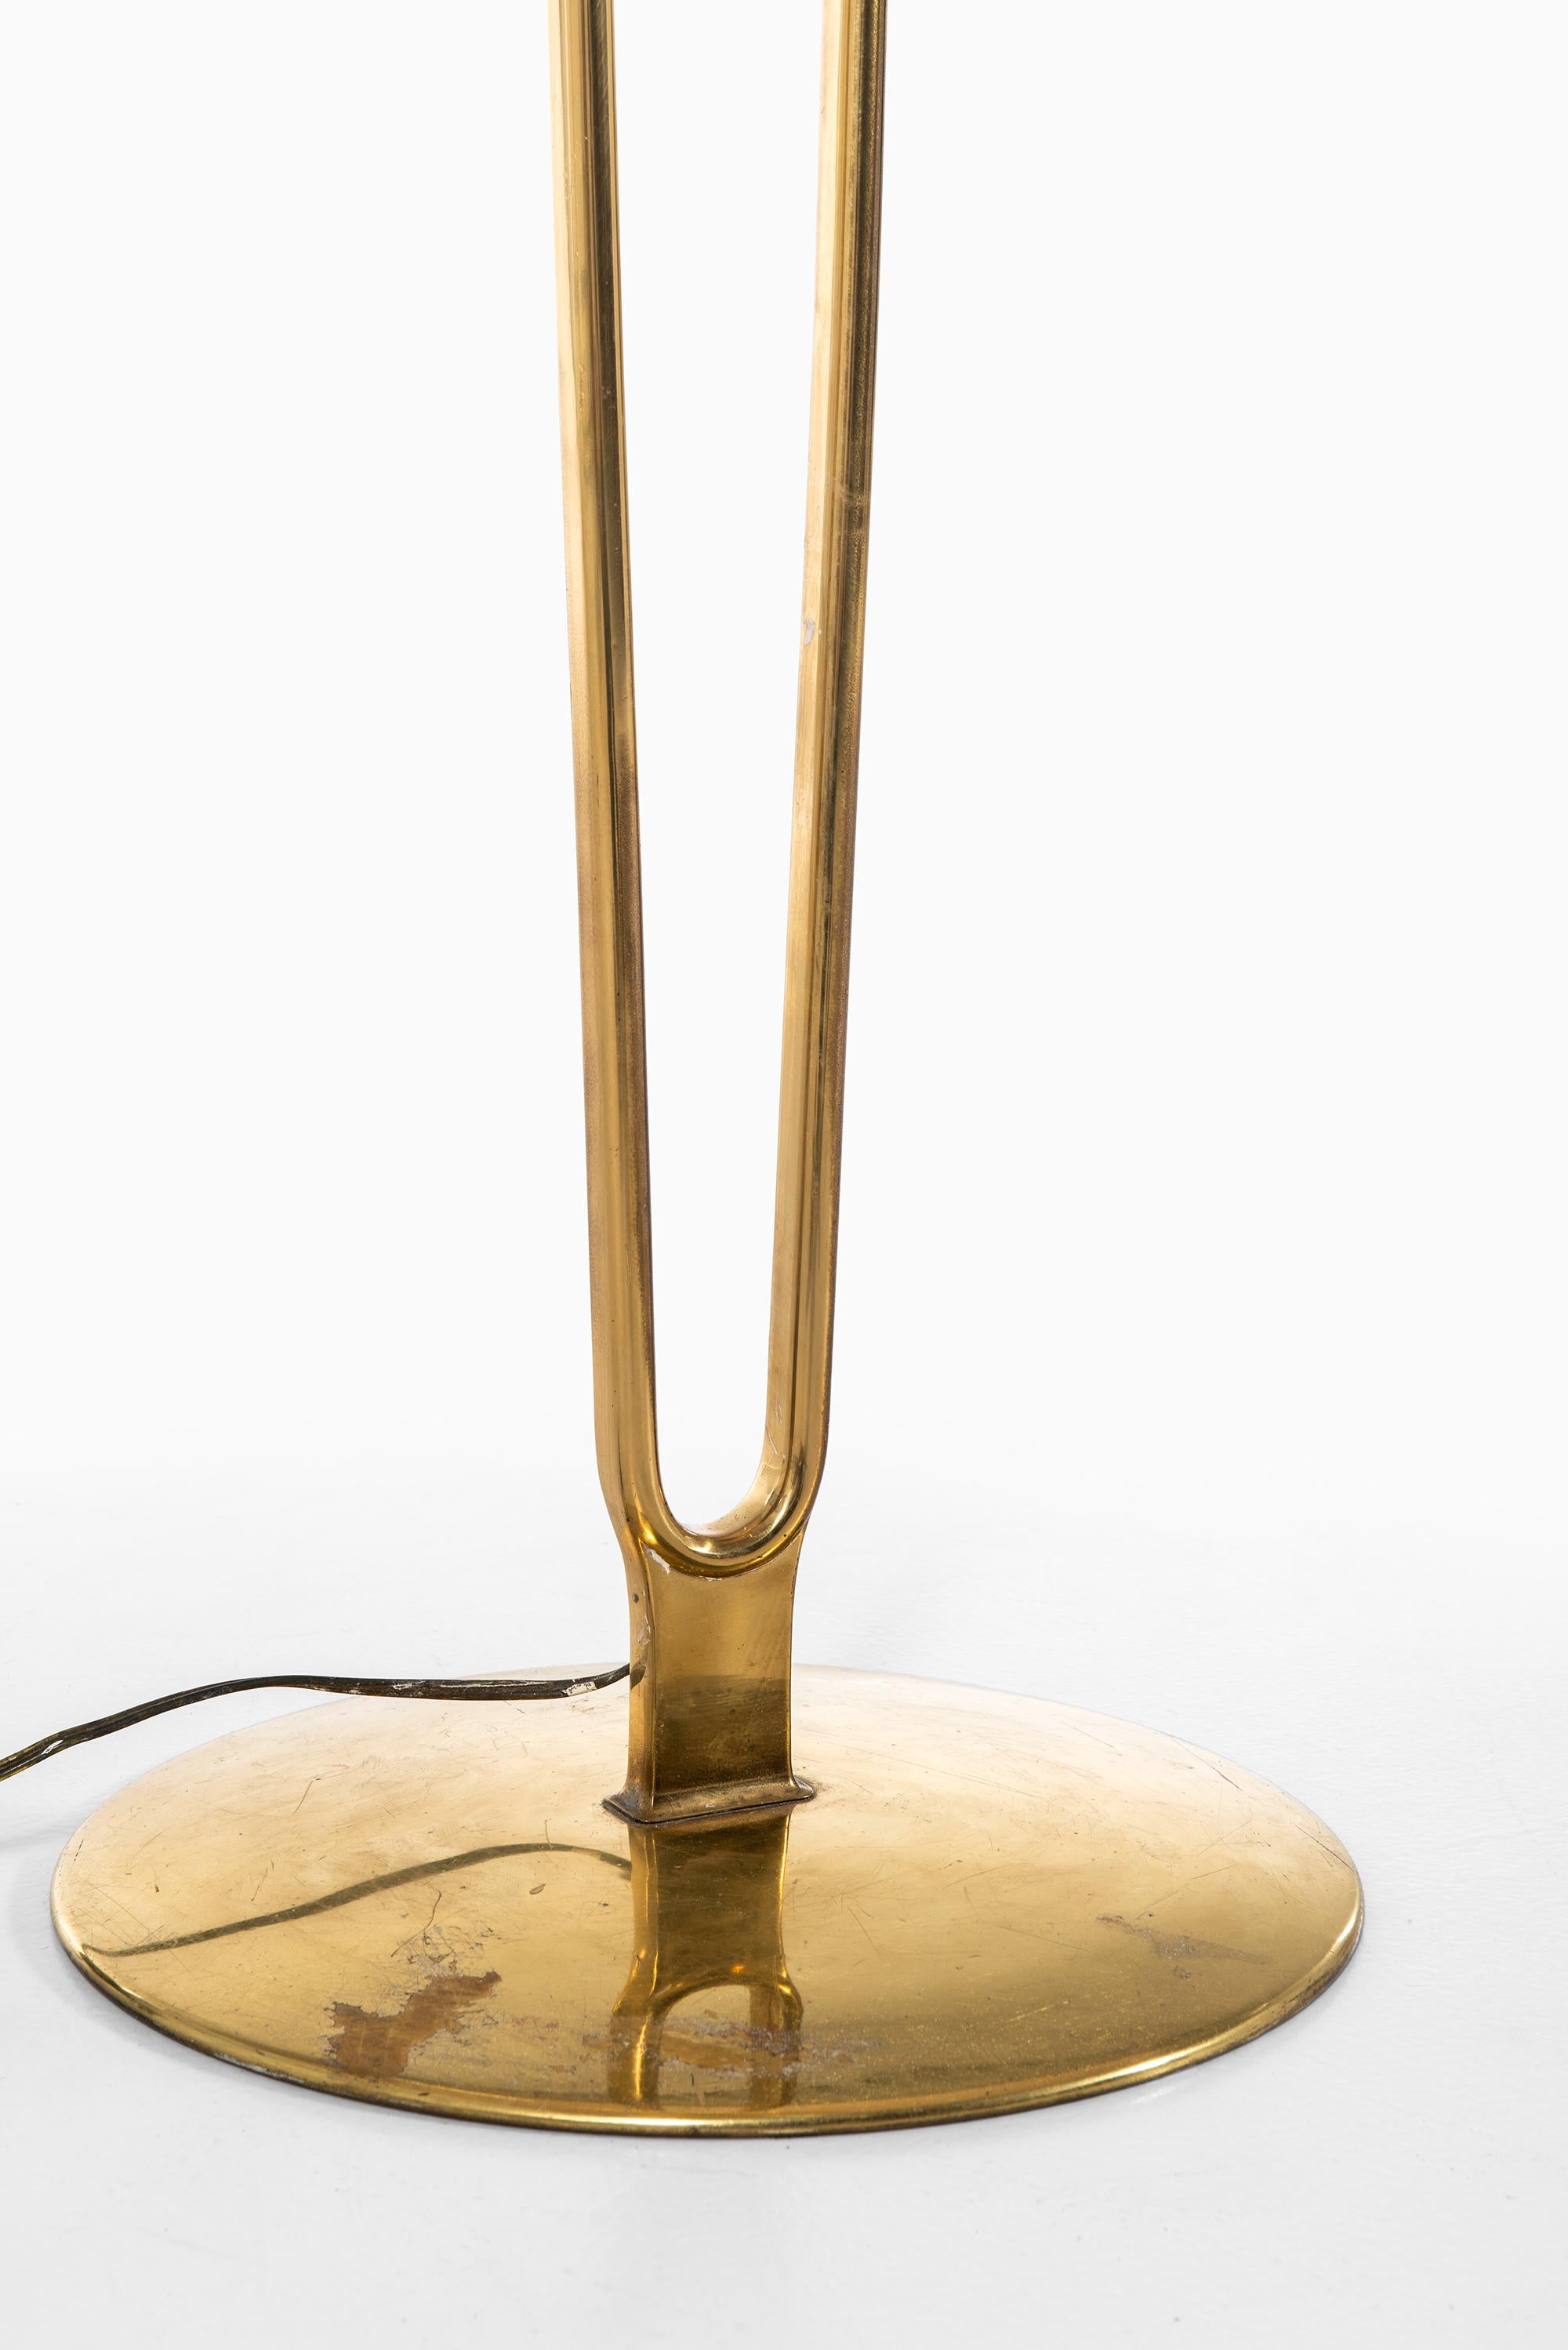 Scandinavian Modern Paavo Tynell Floor Lamps Model 10506 Produced by Taito Oy in Finland